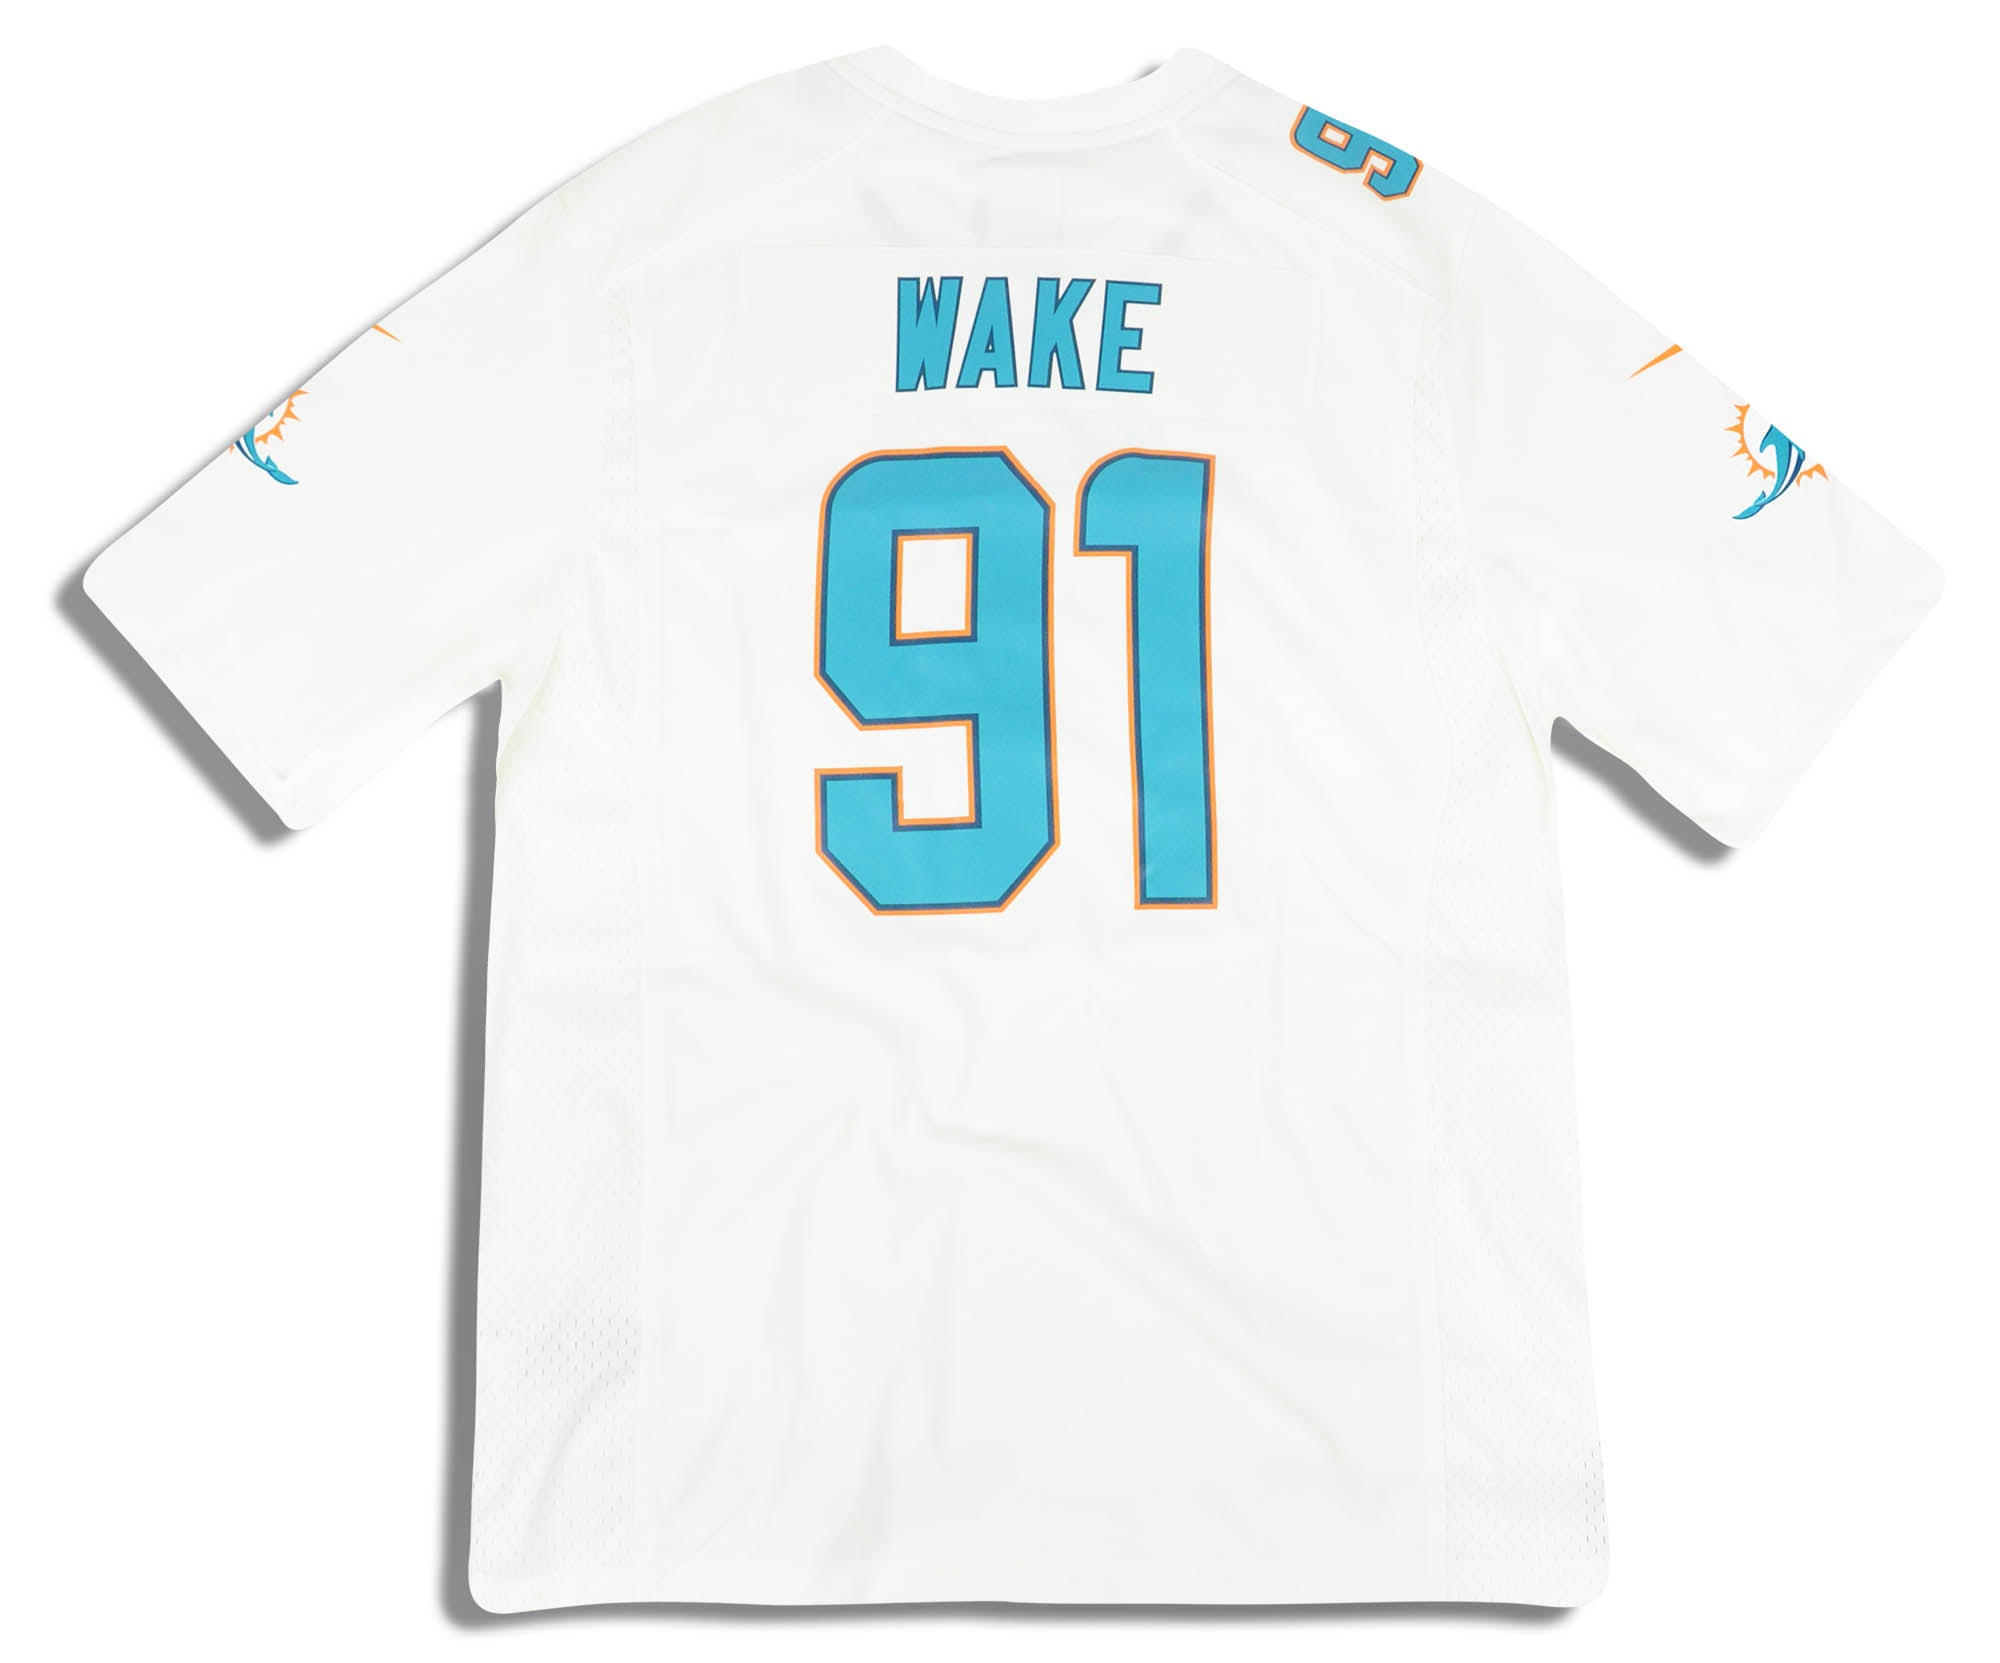 2018 MIAMI DOLPHINS WAKE #91 NIKE GAME JERSEY (AWAY) L - W/TAGS